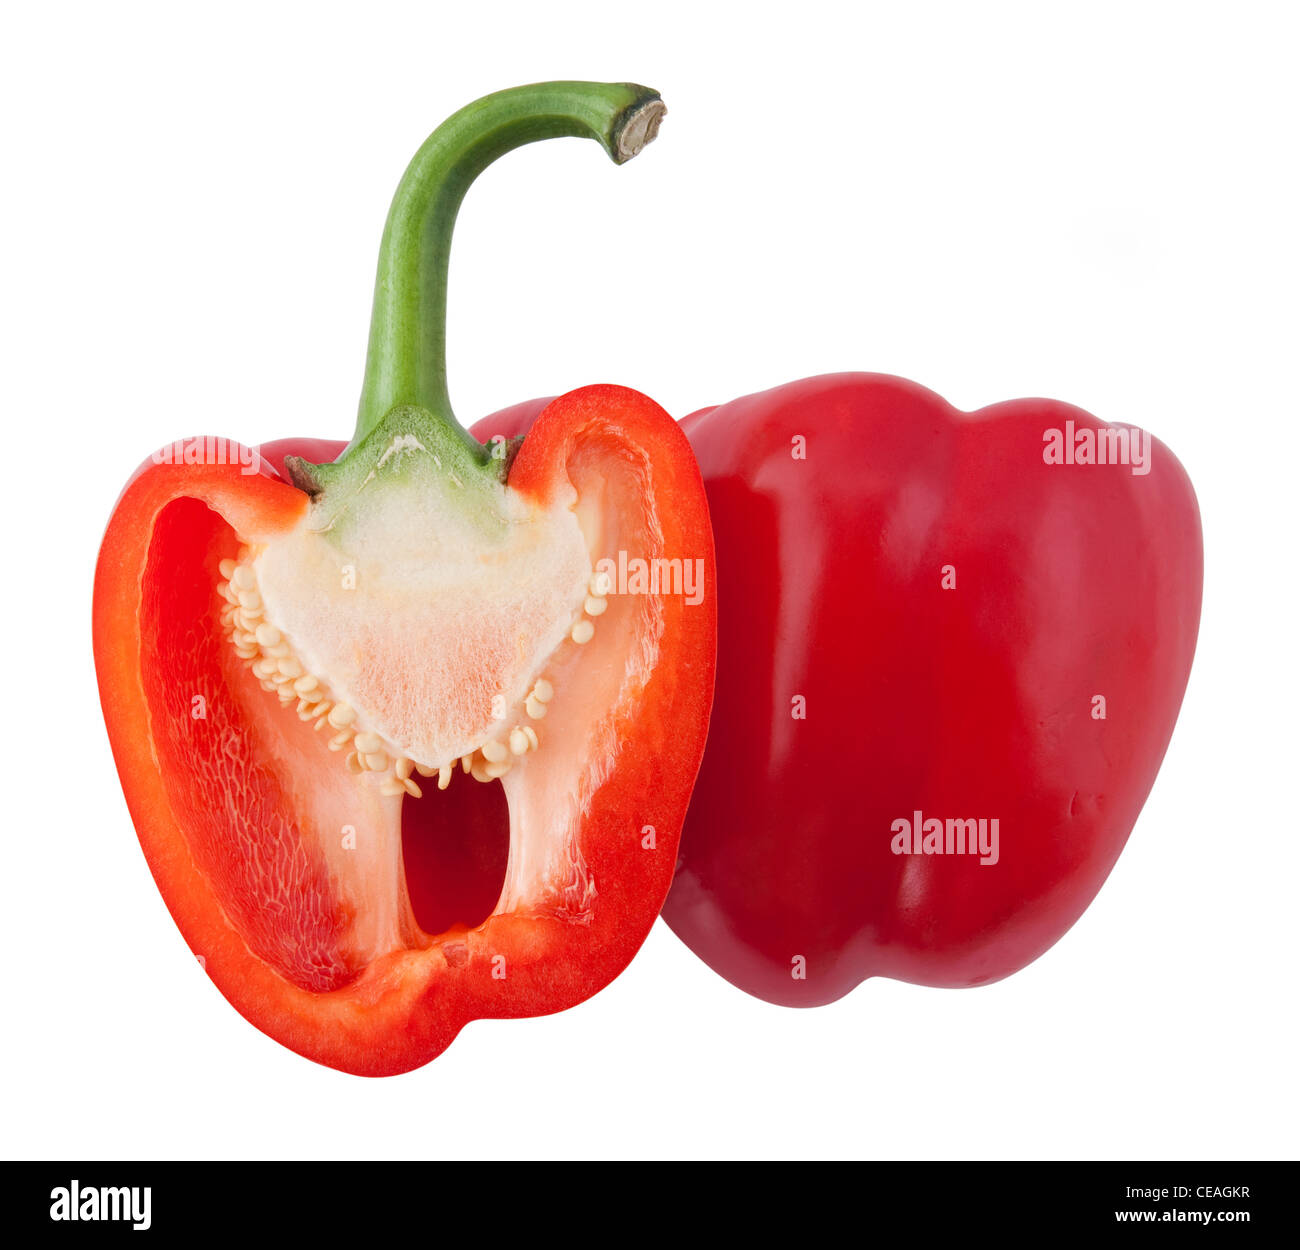 Views of a split red bell pepper on a white background. Stock Photo